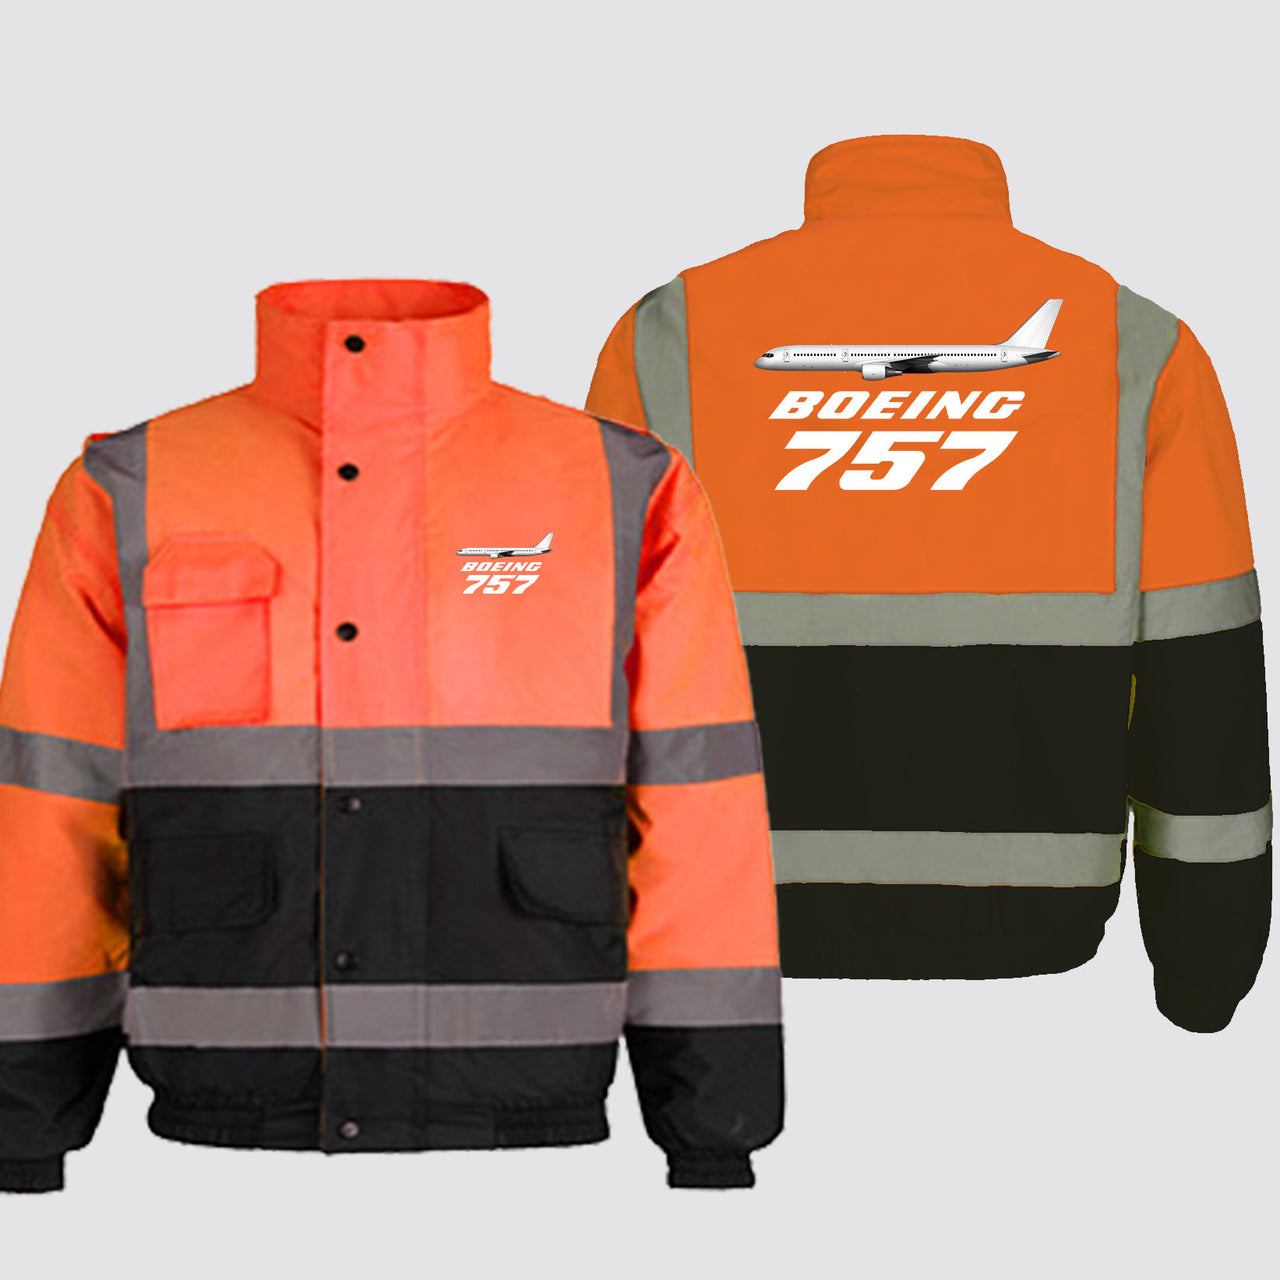 The Boeing 757 Designed Reflective Winter Jackets